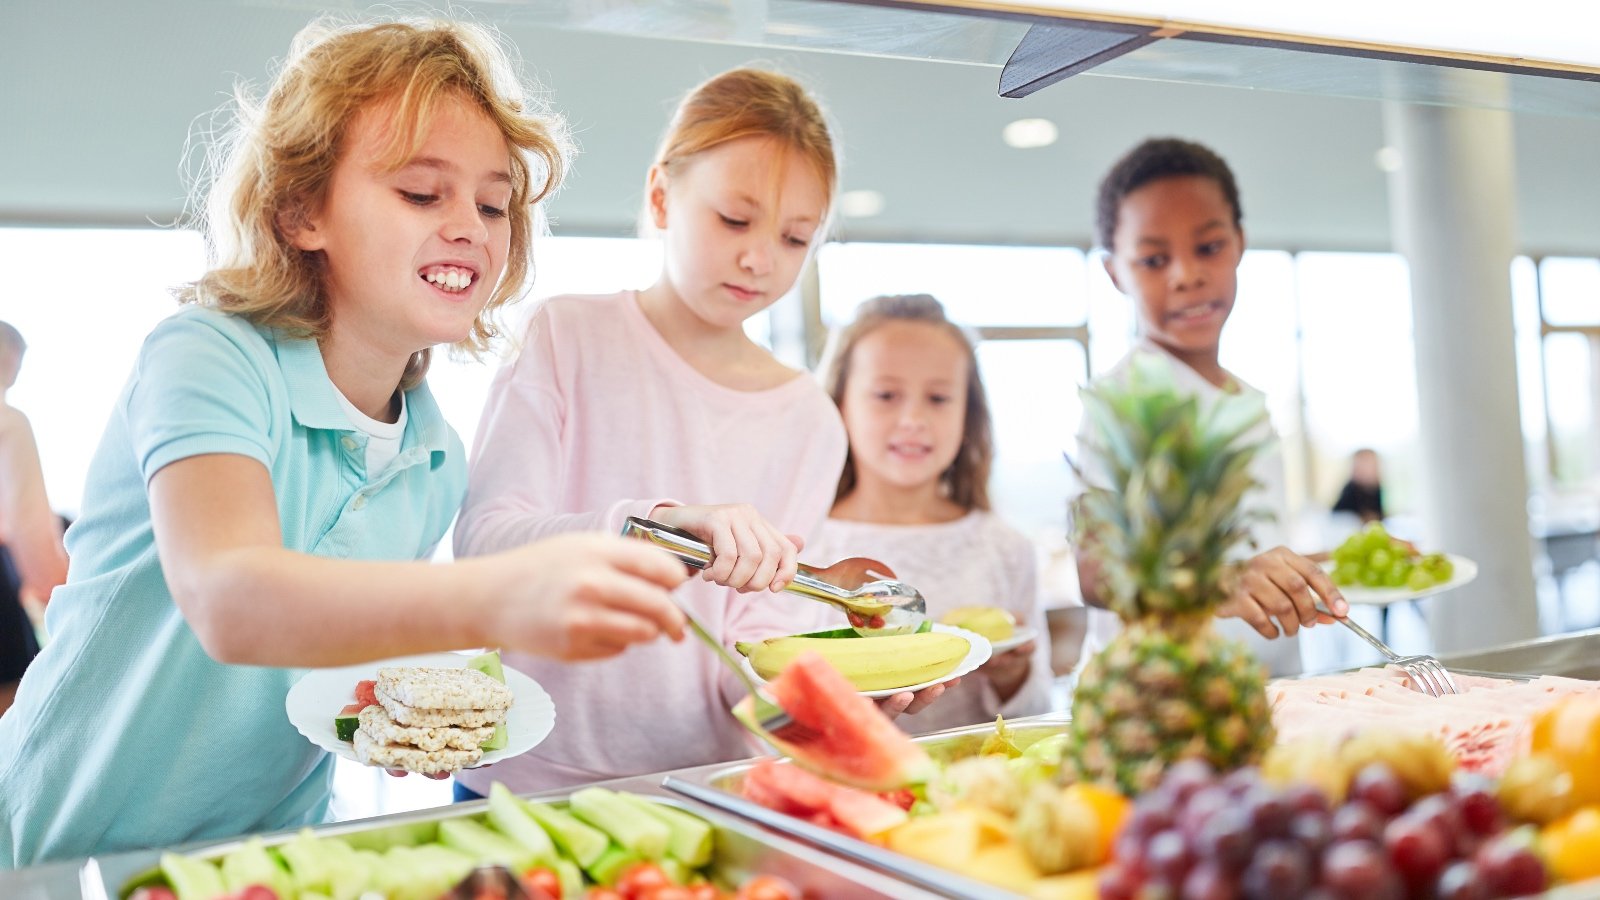 Nationwide Campaign Calls On UK Councils To Create 'Plant-Based Schools'